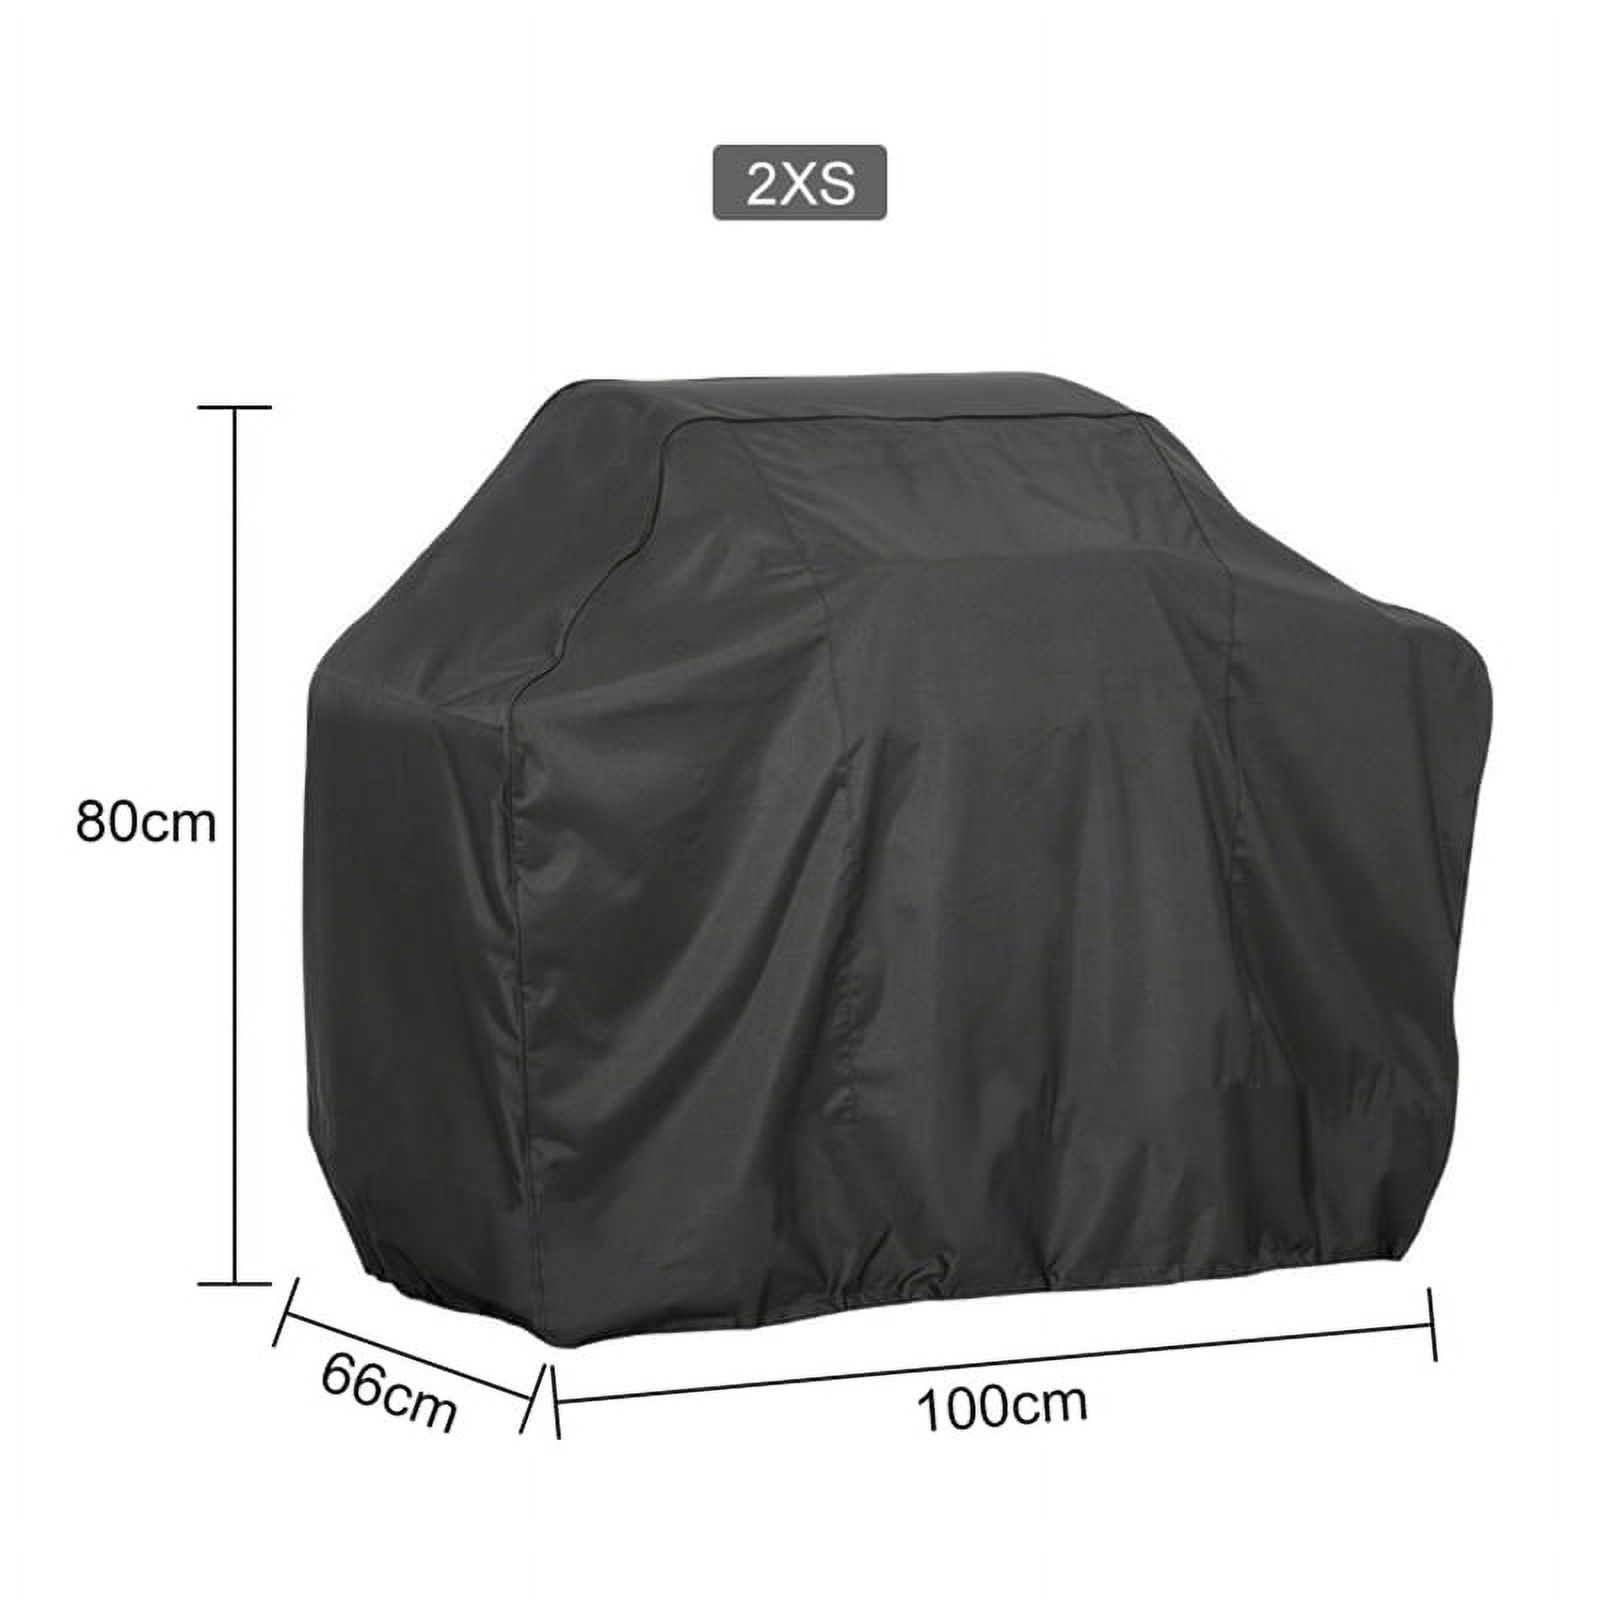 Grill Cover,BBQ Special Grill Cover,Waterproof and UV Resistant Material, Durable and Convenient,Fits Grills of Weber Char-Broil Nexgrill Brinkmann and More-Black - image 1 of 6